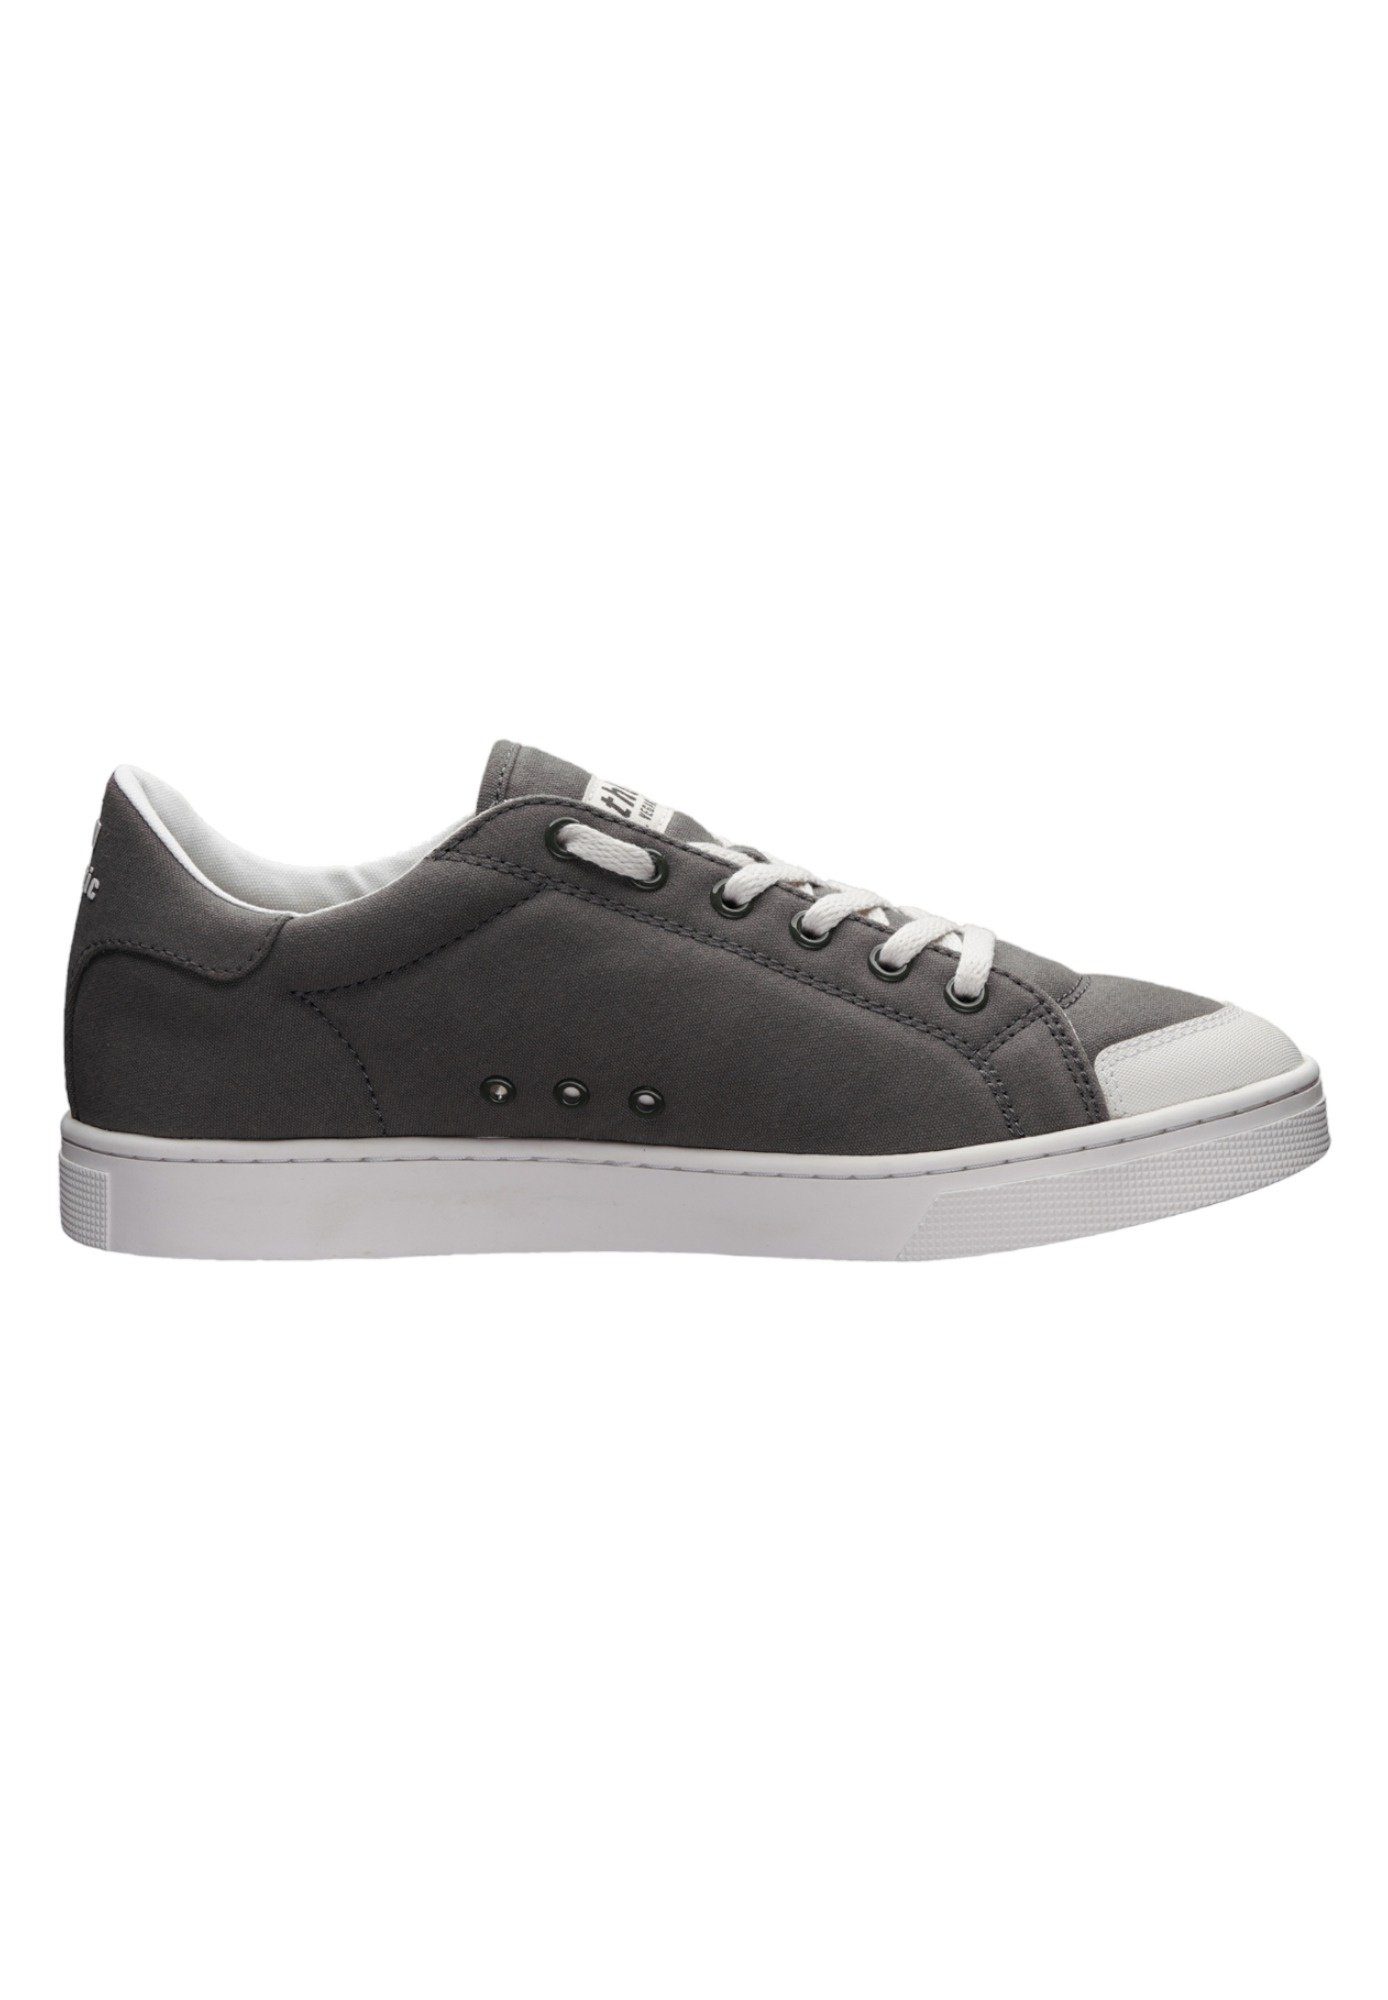 Lo Grey White Just - Active Fairtrade Produkt Cut Donkey Sneaker ETHLETIC